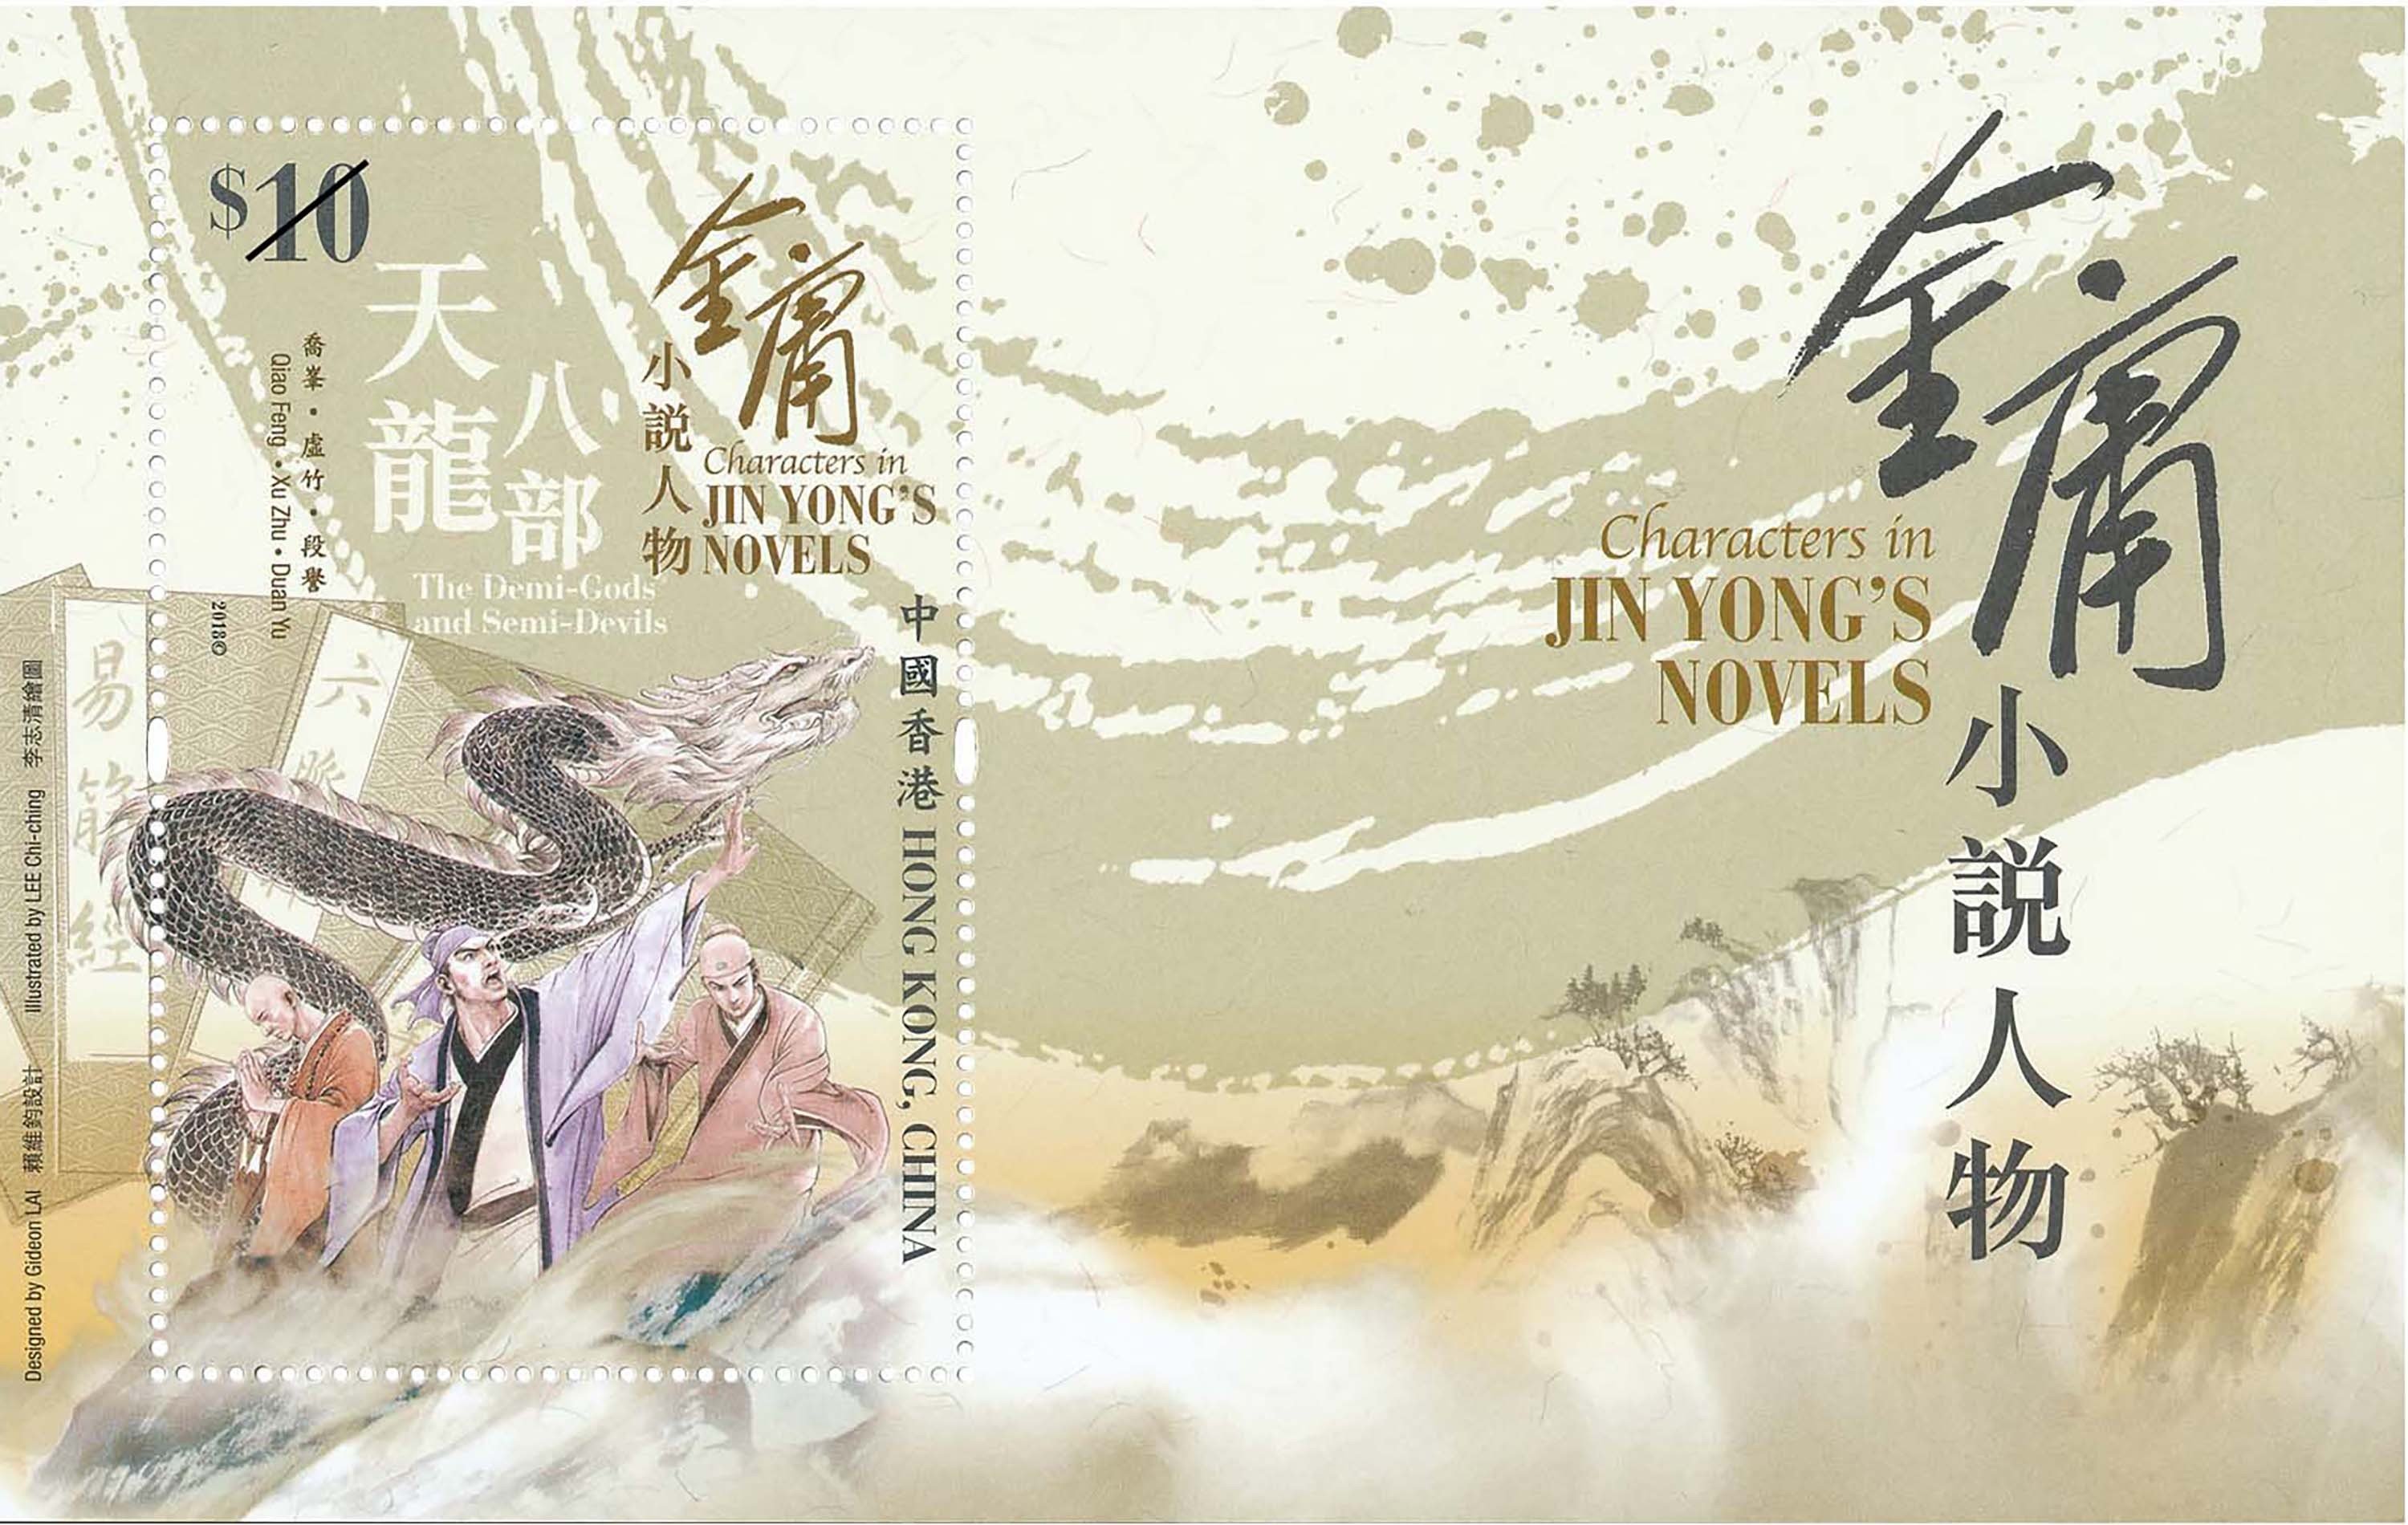 Hongkong Post is to release a set of special stamps featuring “Characters from Jin Yong's Novels”. Photo: Handout.